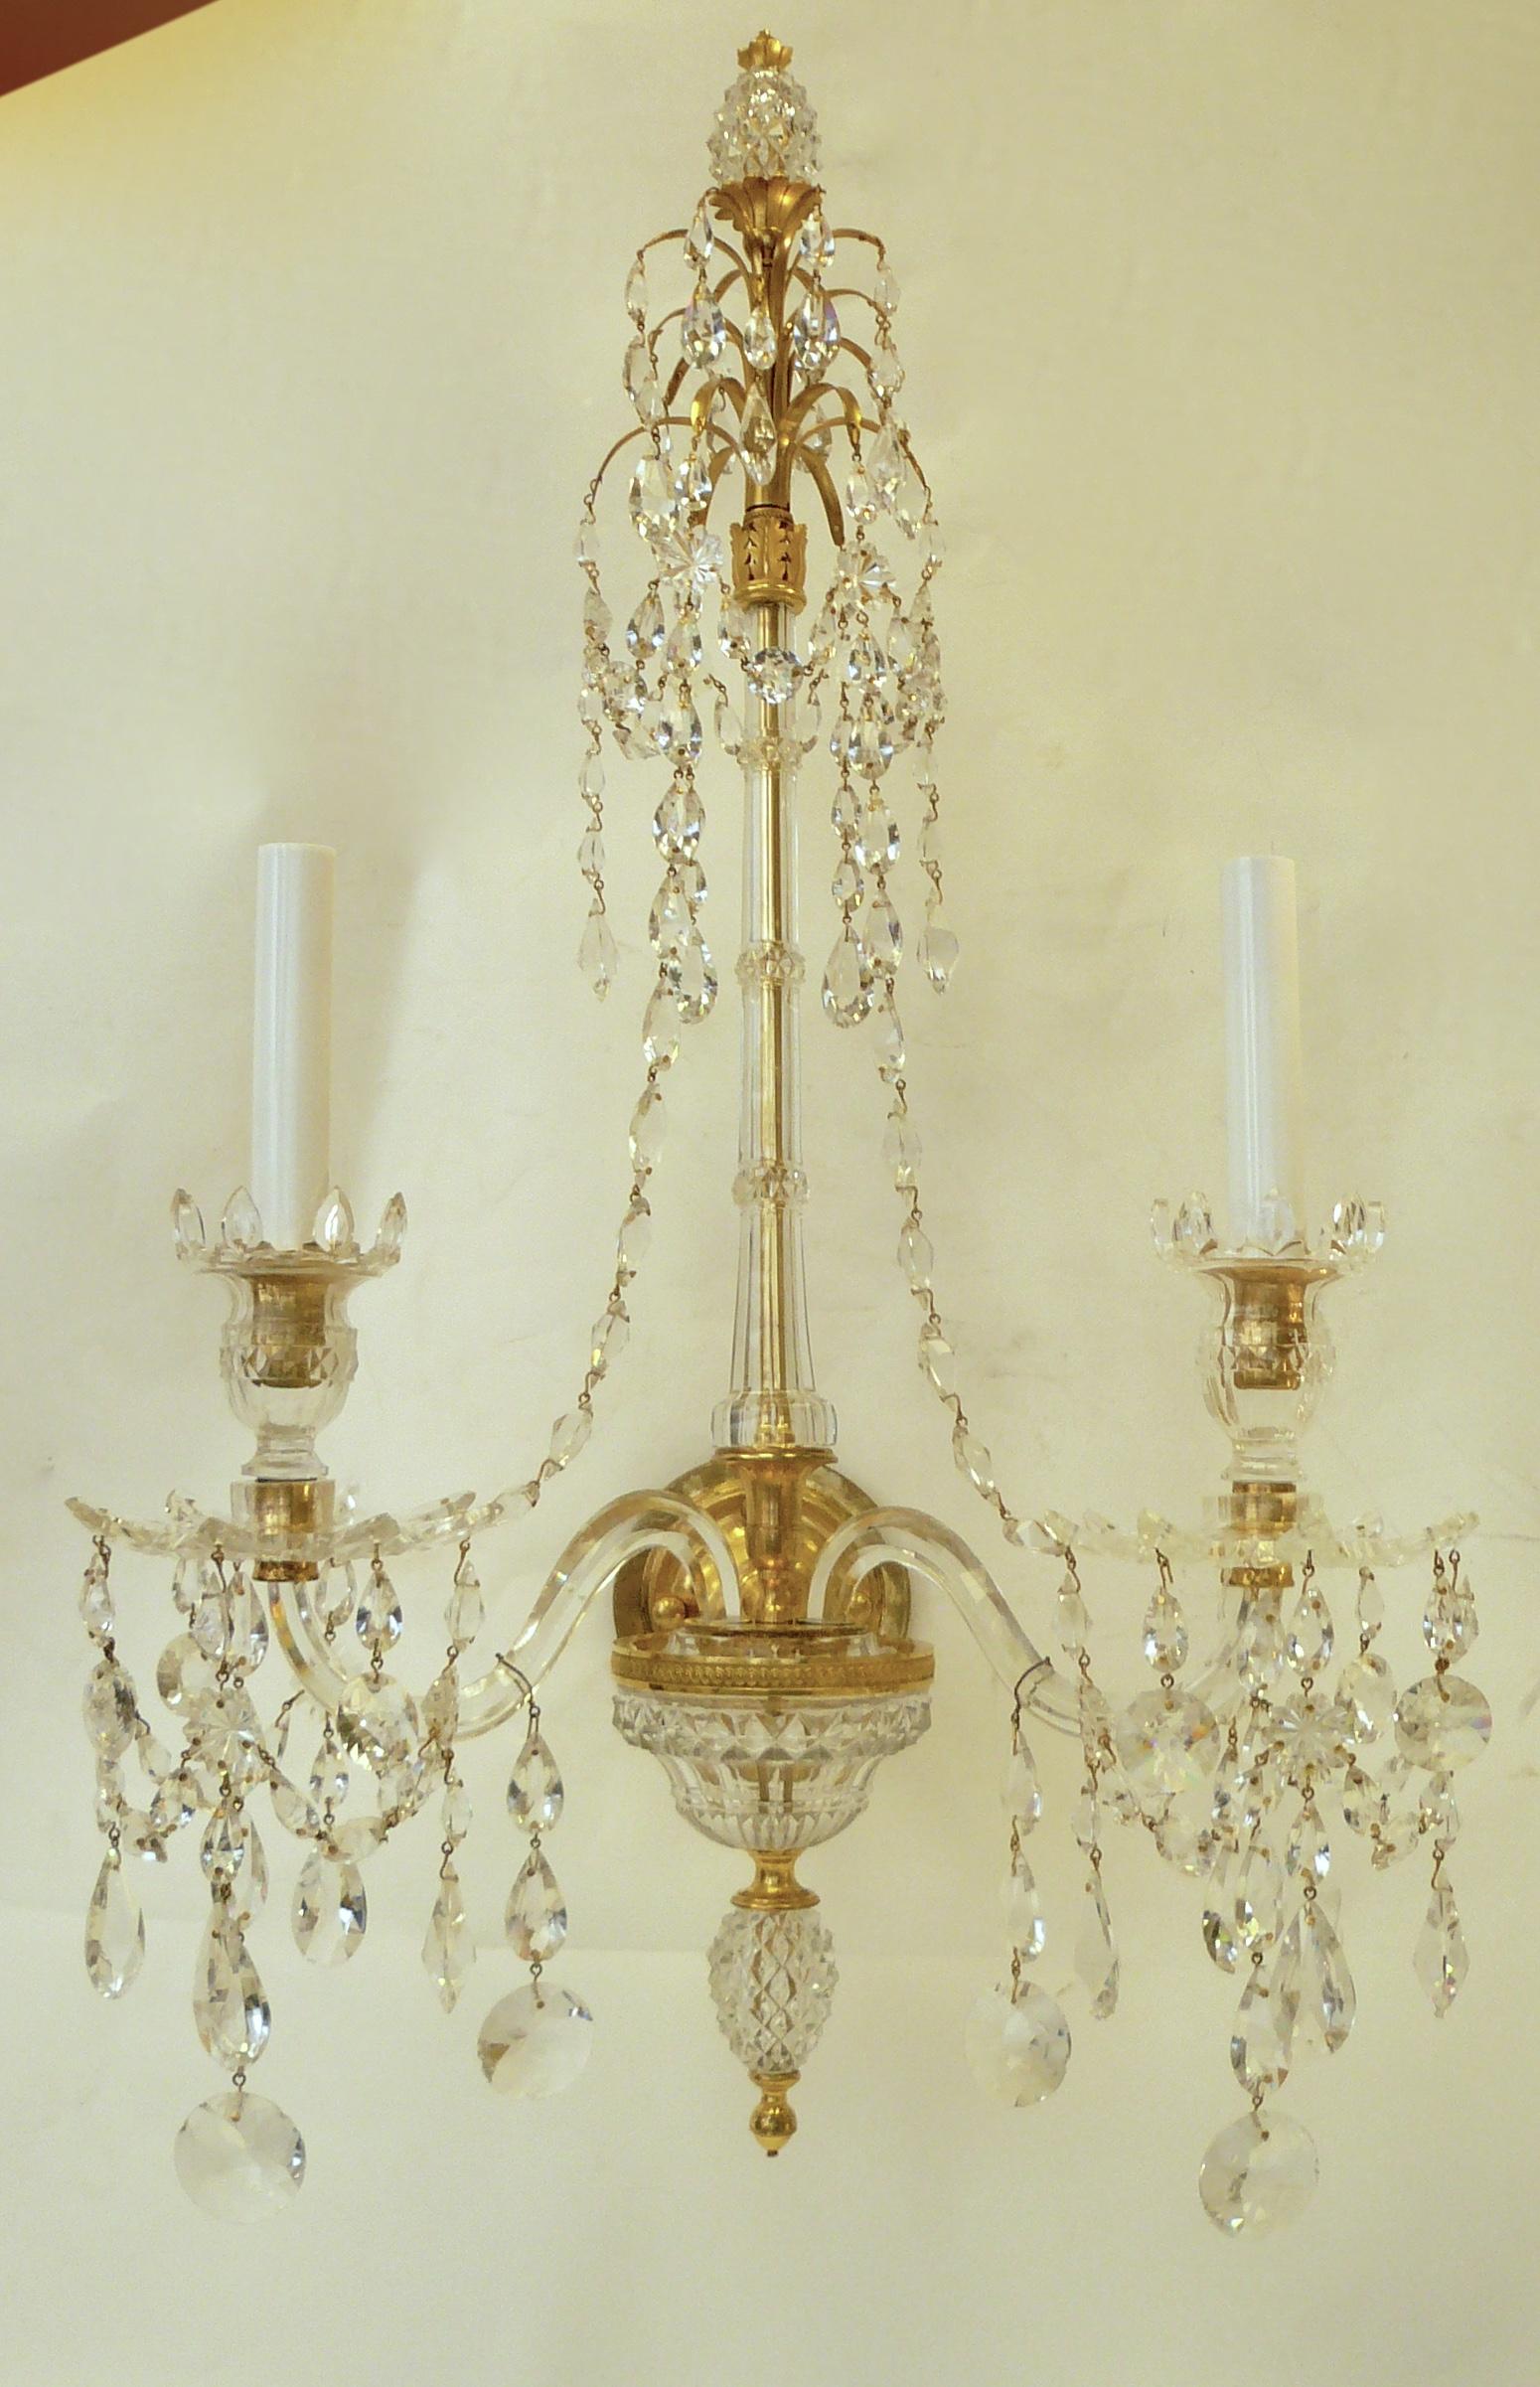 Exquisite Pair of Georgian Sconces in the Adam Style, Attributed to Wm. Parker For Sale 5